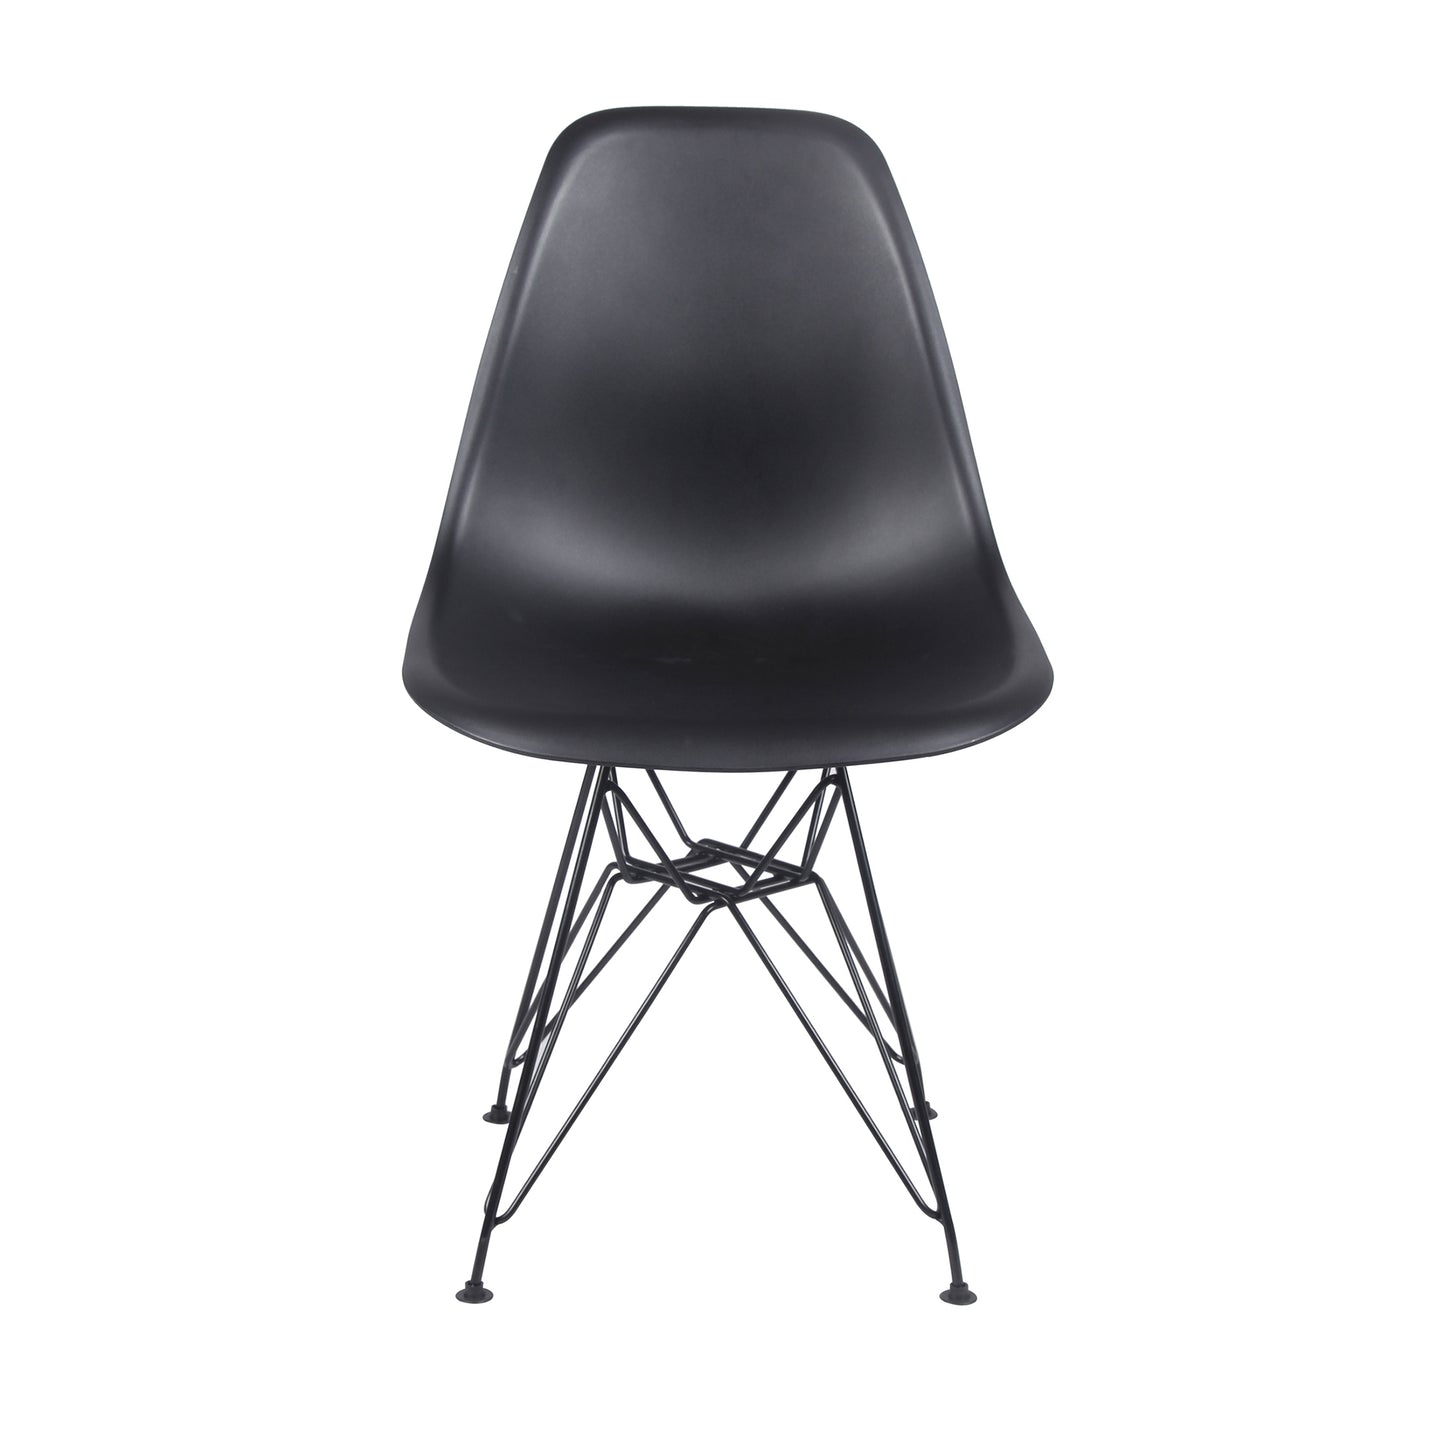 GIA Plastic  Armless Chair with Metal Legs-Black